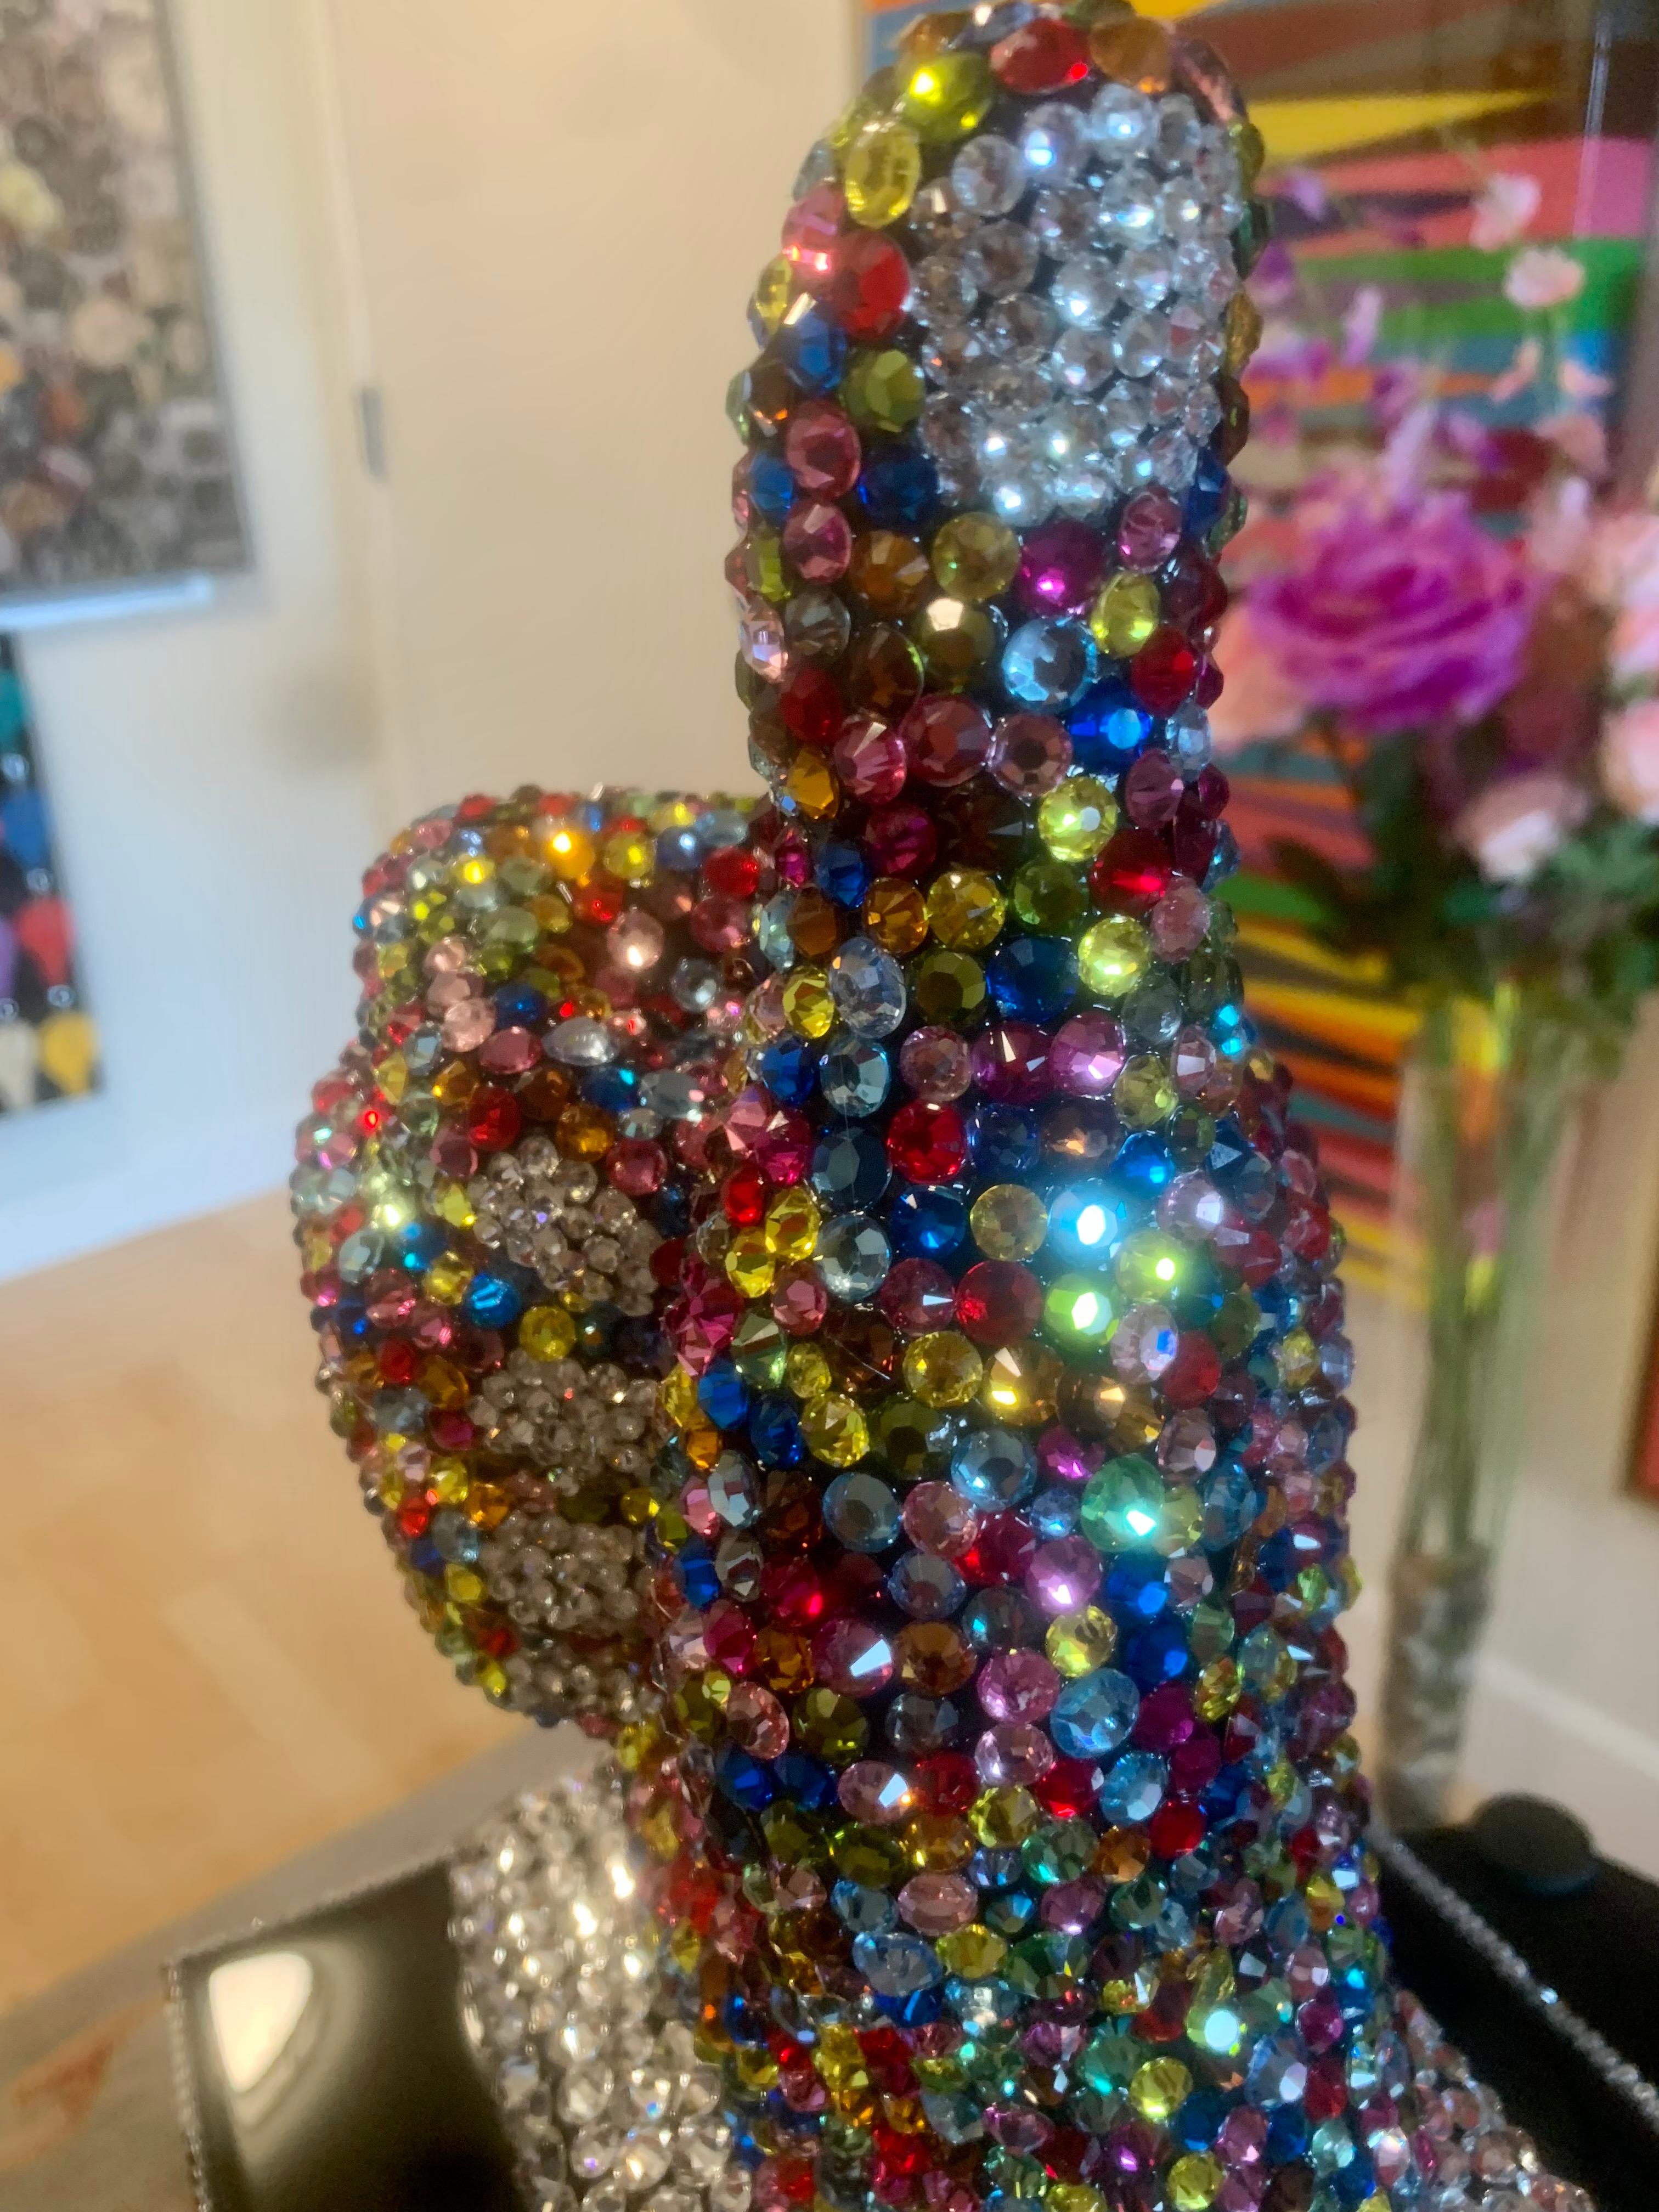 THUMBS UP FOR LIFE (One of a Kind Swarovski Mixed Media Sculpture) 6